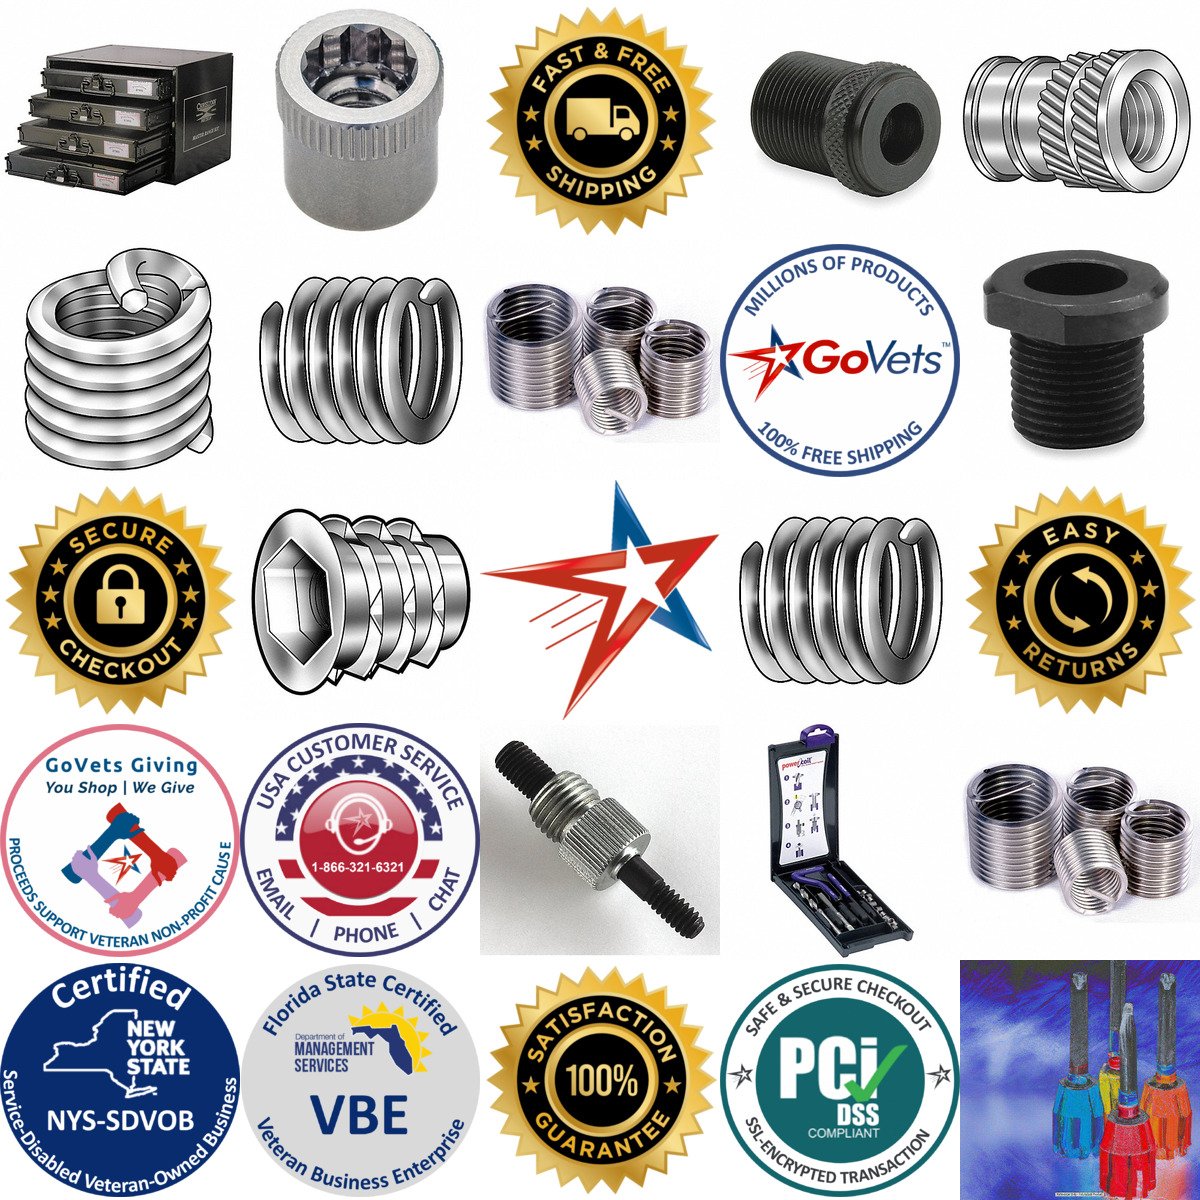 A selection of Thread Insert products on GoVets